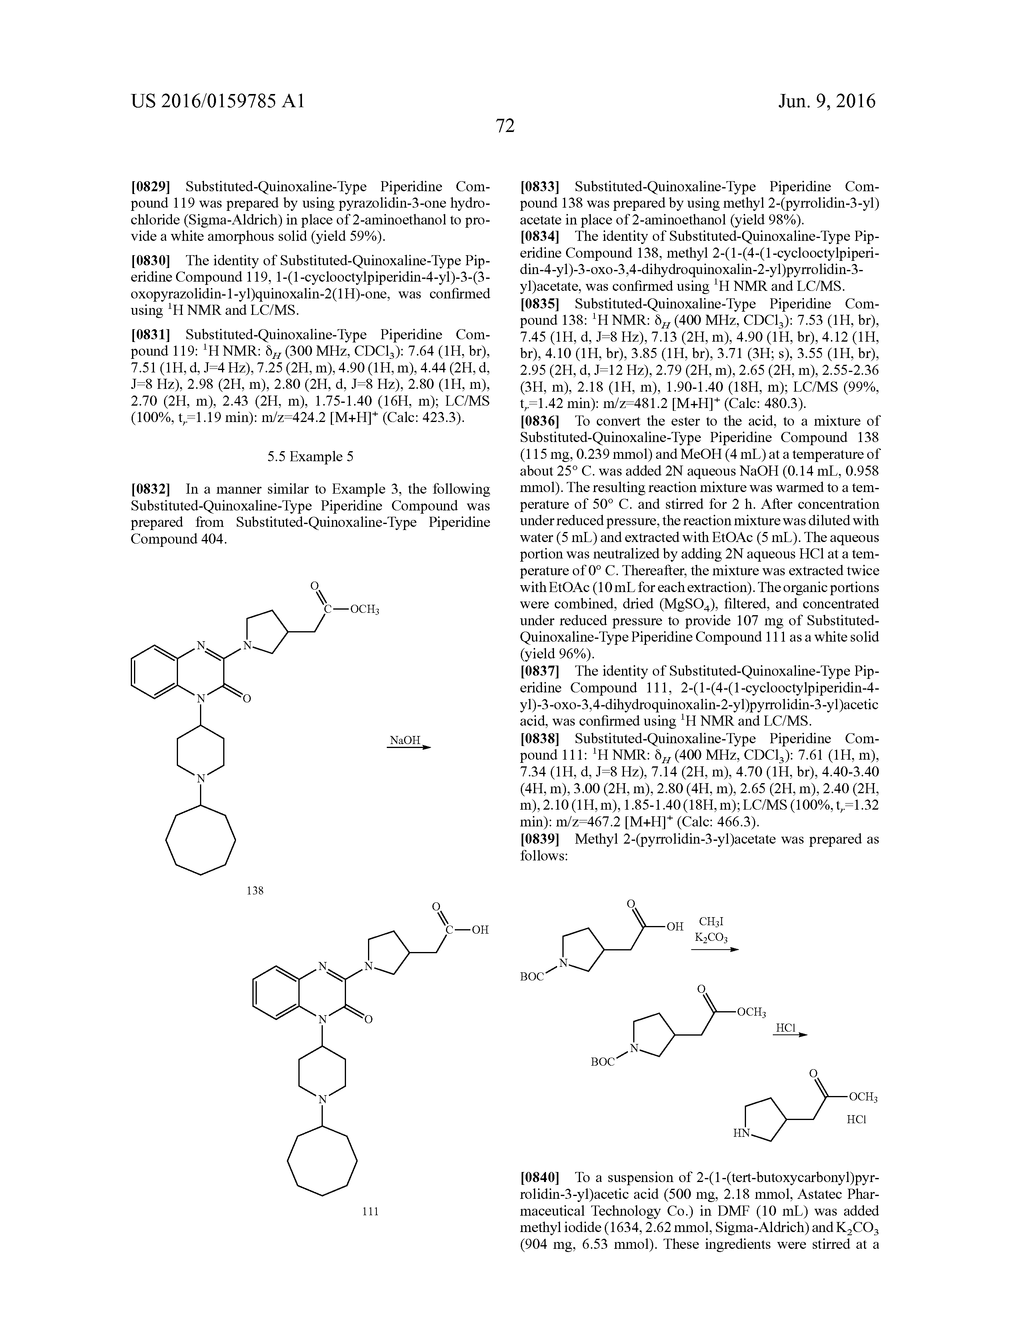 SUBSTITUTED-QUINOXALINE-TYPE PIPERIDINE COMPOUNDS AND THE USES THEREOF - diagram, schematic, and image 73